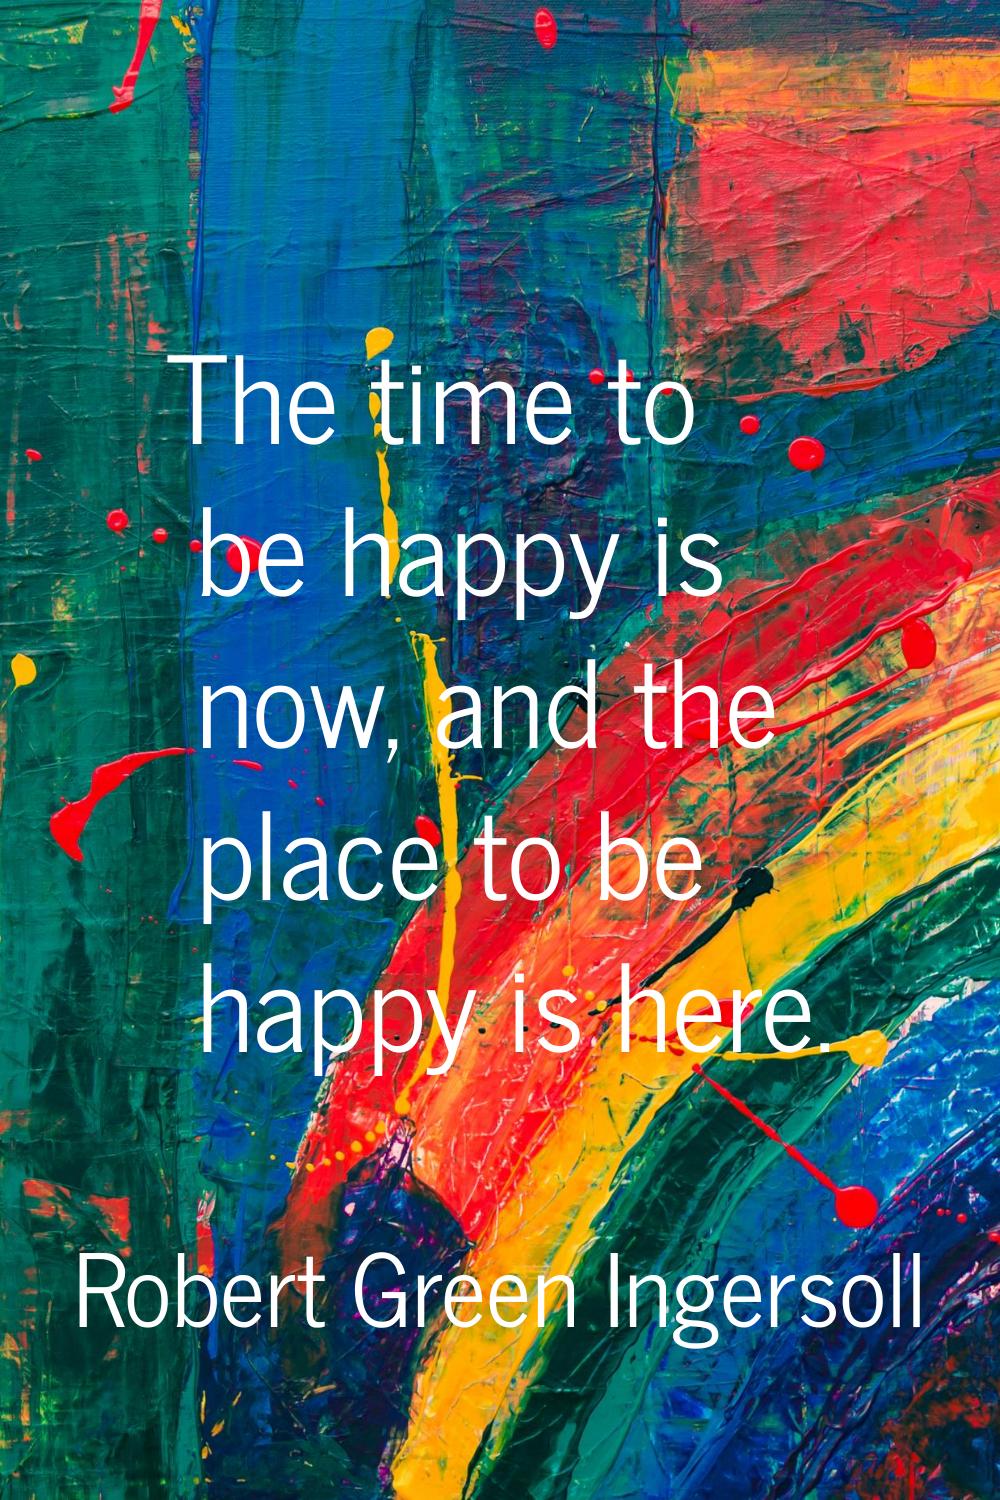 The time to be happy is now, and the place to be happy is here.